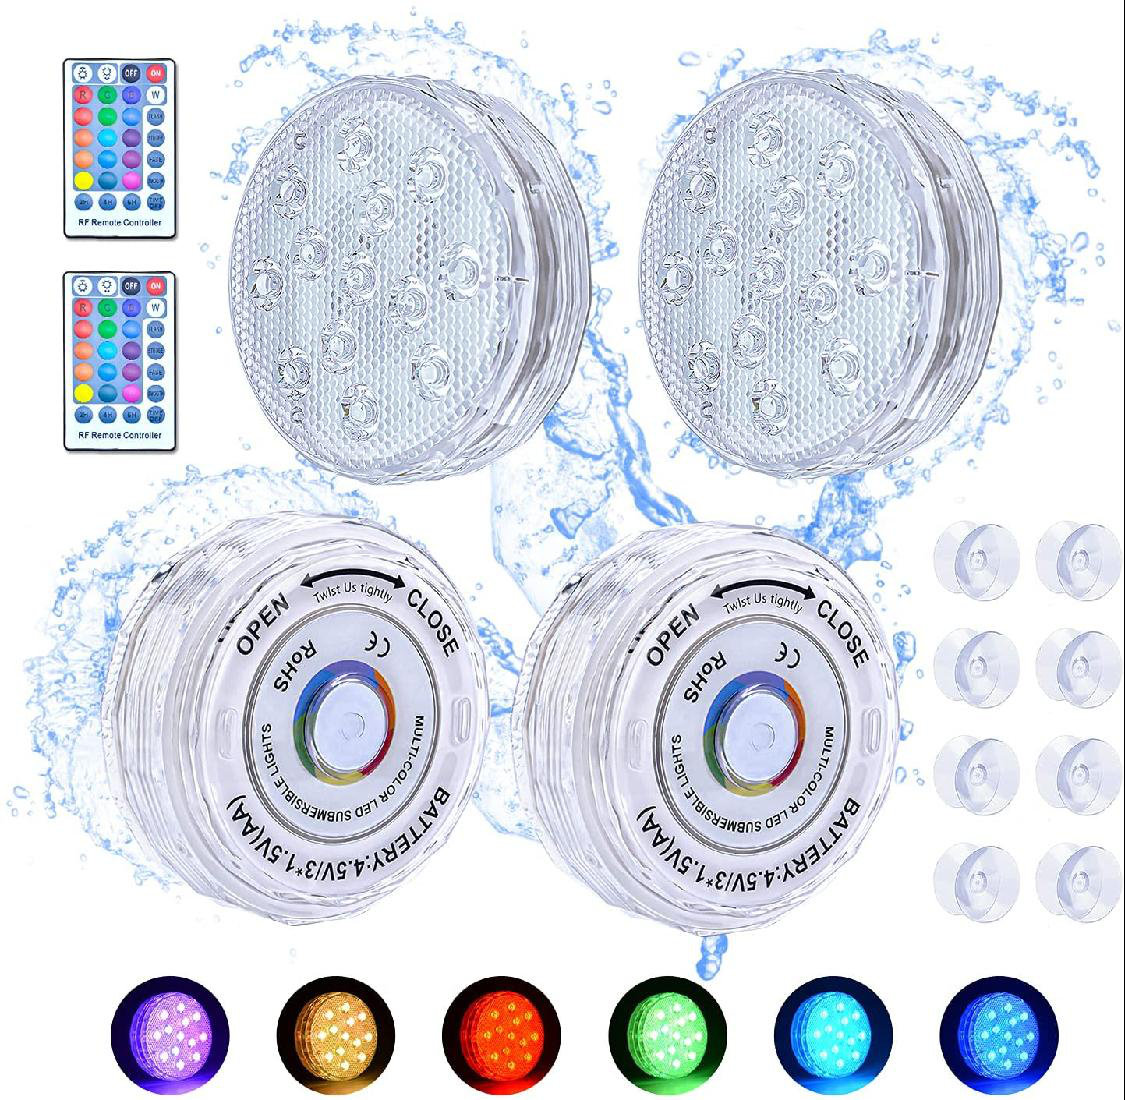 Lot 16 Colors Submersible Led Pool Light Underwater Hot Tub Pond Lights w/Remote 